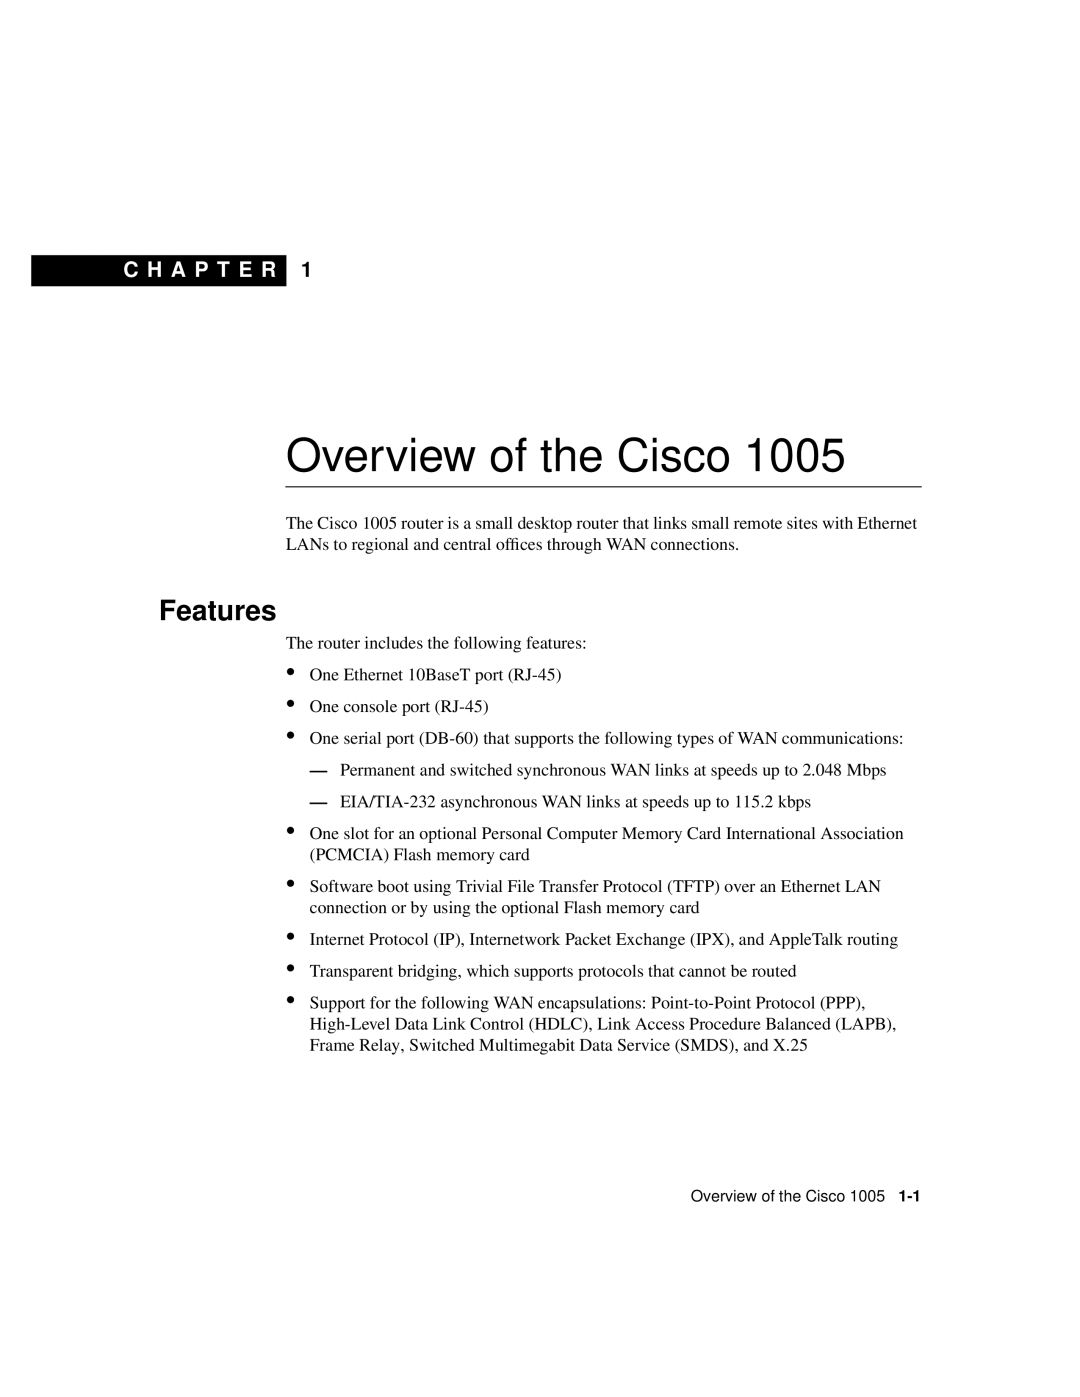 Cisco Systems 1005 manual Features, Overview of the Cisco, C H A P T E R 